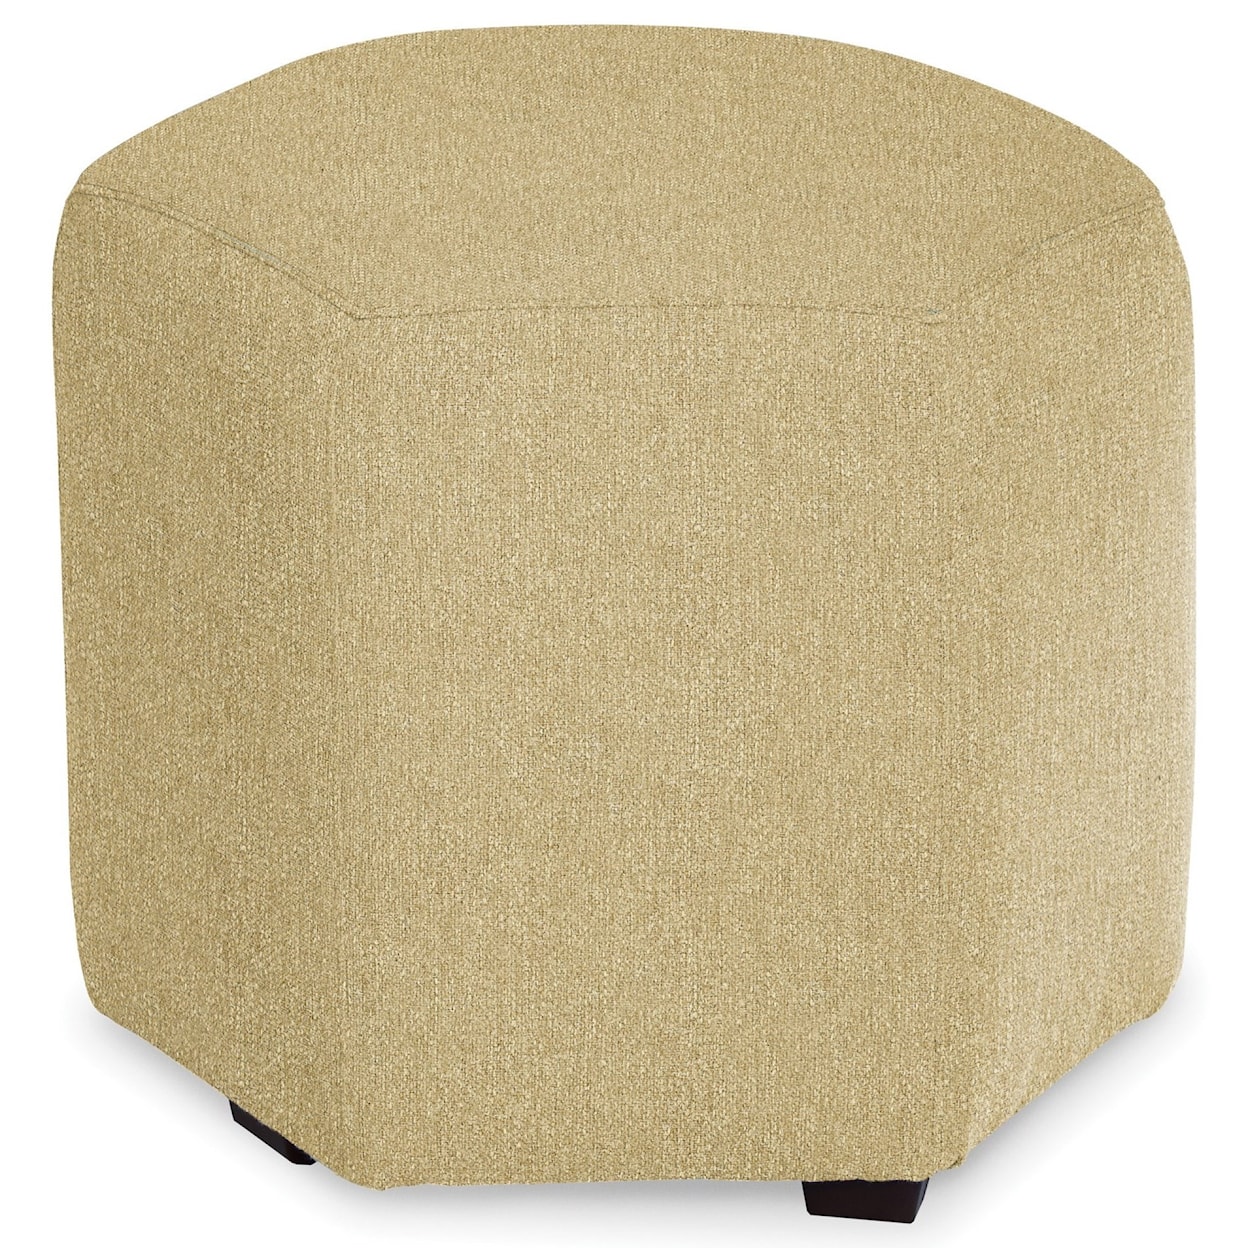 Hickory Craft 043200 Accent Ottoman